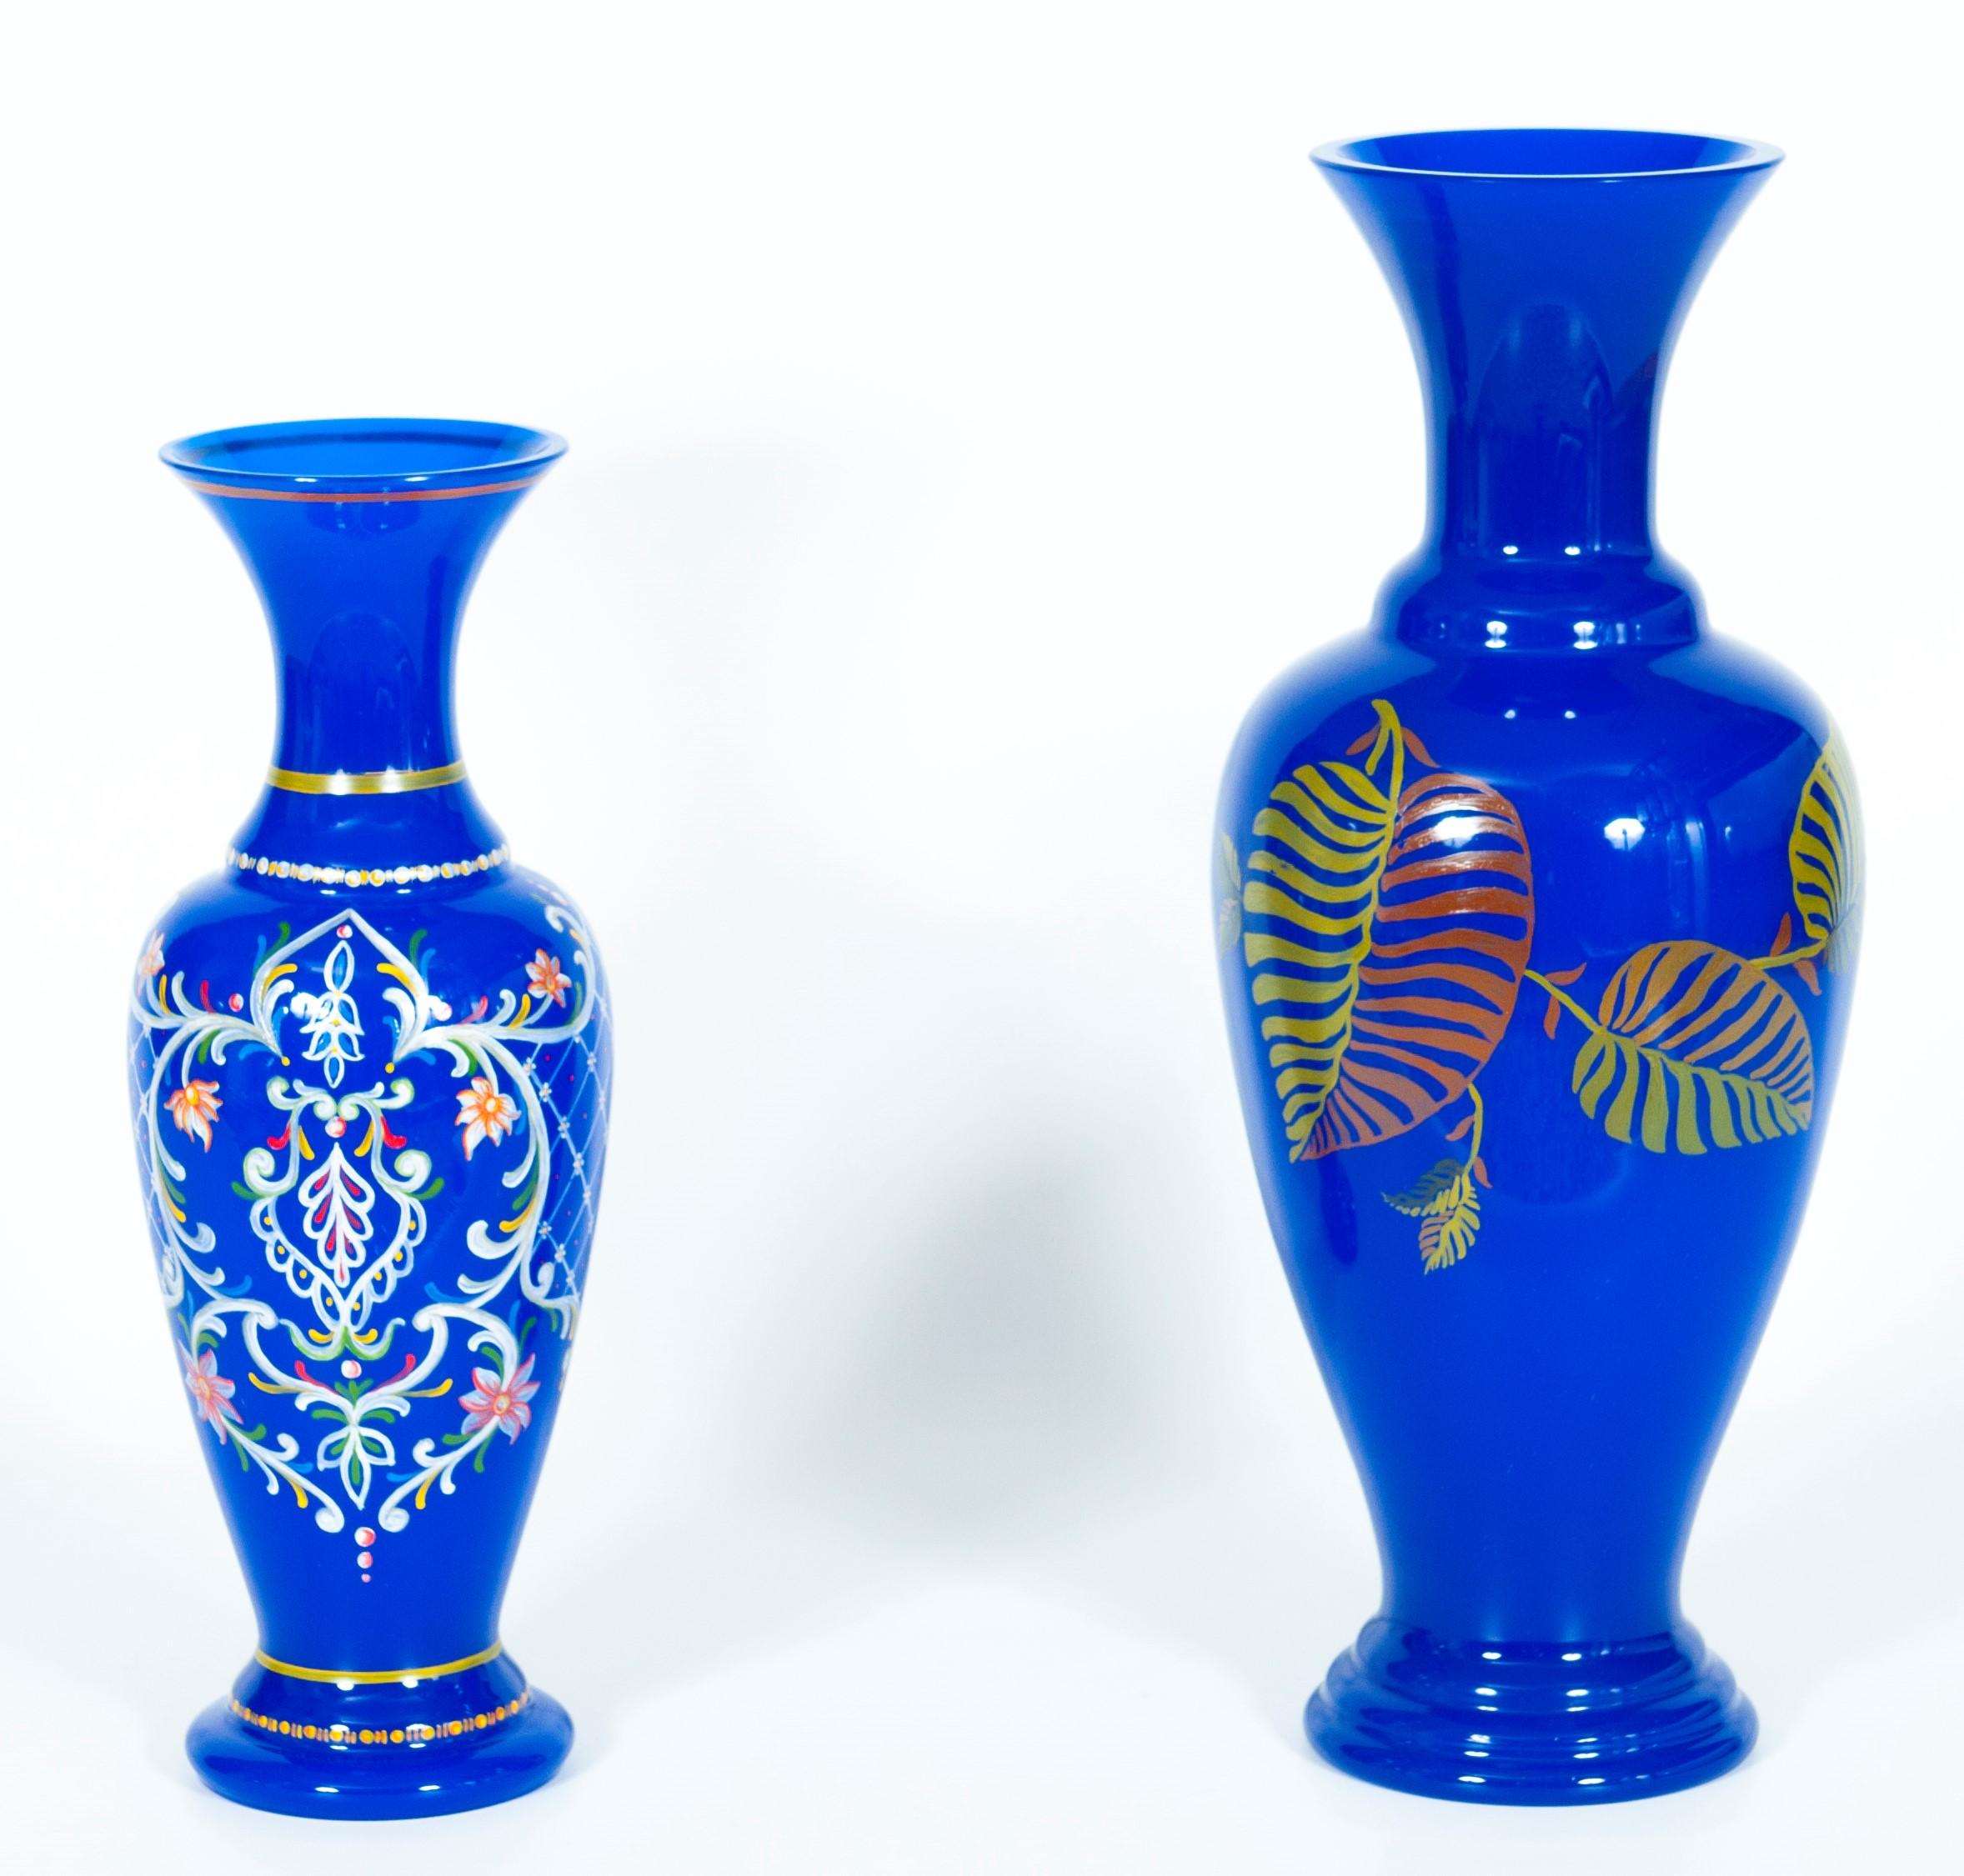 Pair of blue Murano glass vases with art painting, Giovanni Dalla Fina, 1980s, Italy.
This amazing pair of Italian vases will steal the scene, thanks to their intense blue color, their refined shapes, their high-quality details, and their beautiful